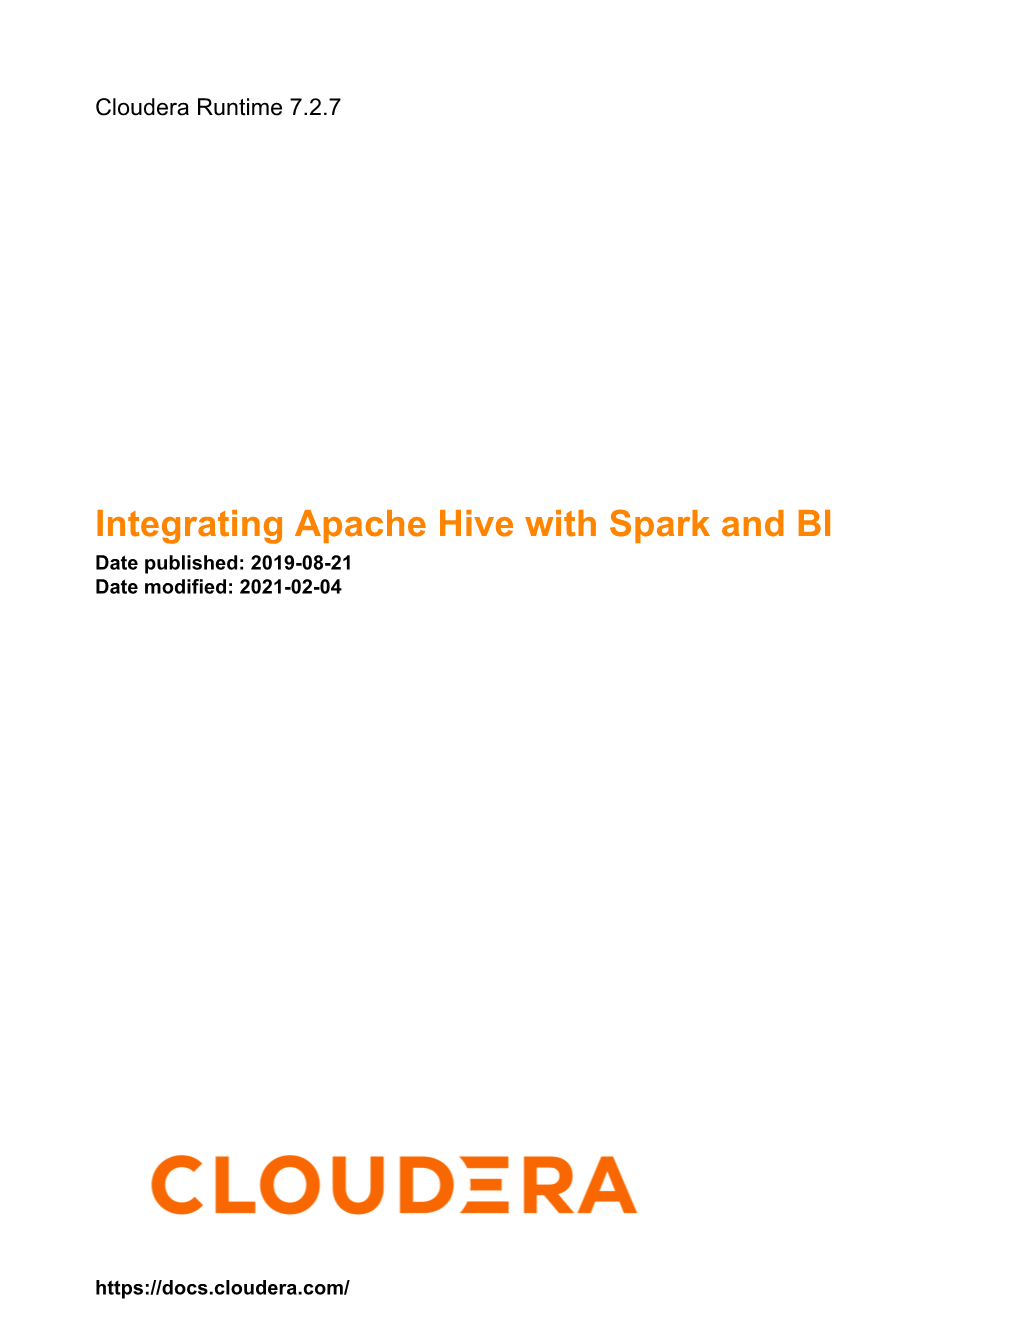 Integrating Apache Hive with Spark and BI Date Published: 2019-08-21 Date Modified: 2021-02-04